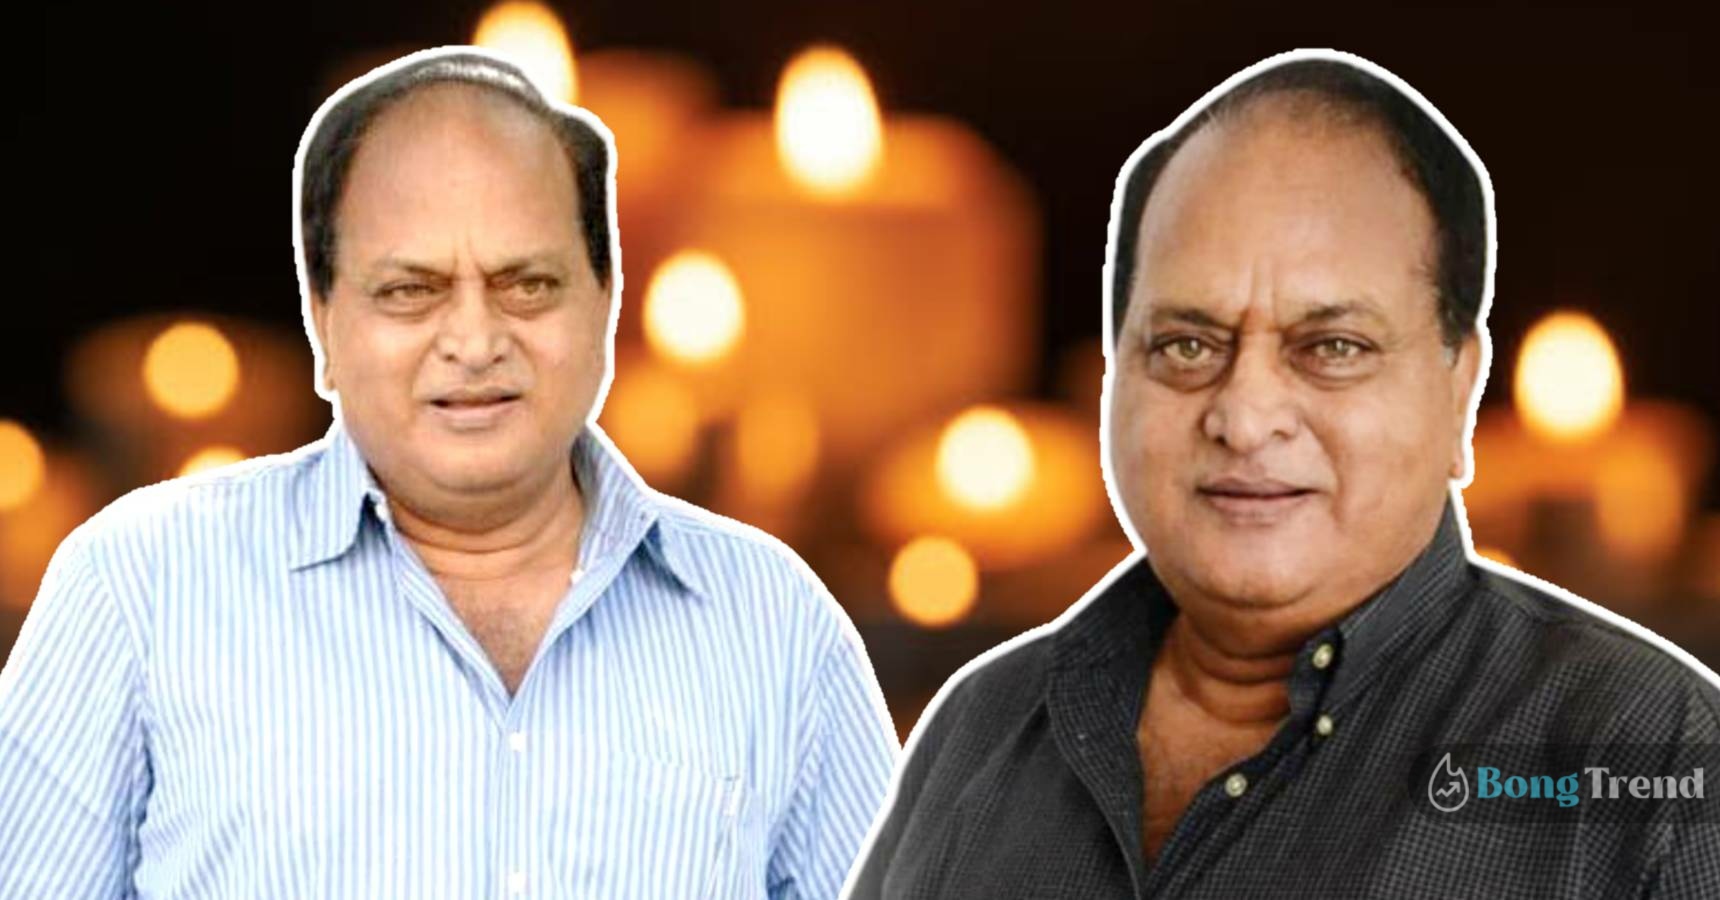 Veteran south Indian actor Chalapathi Rao passed away